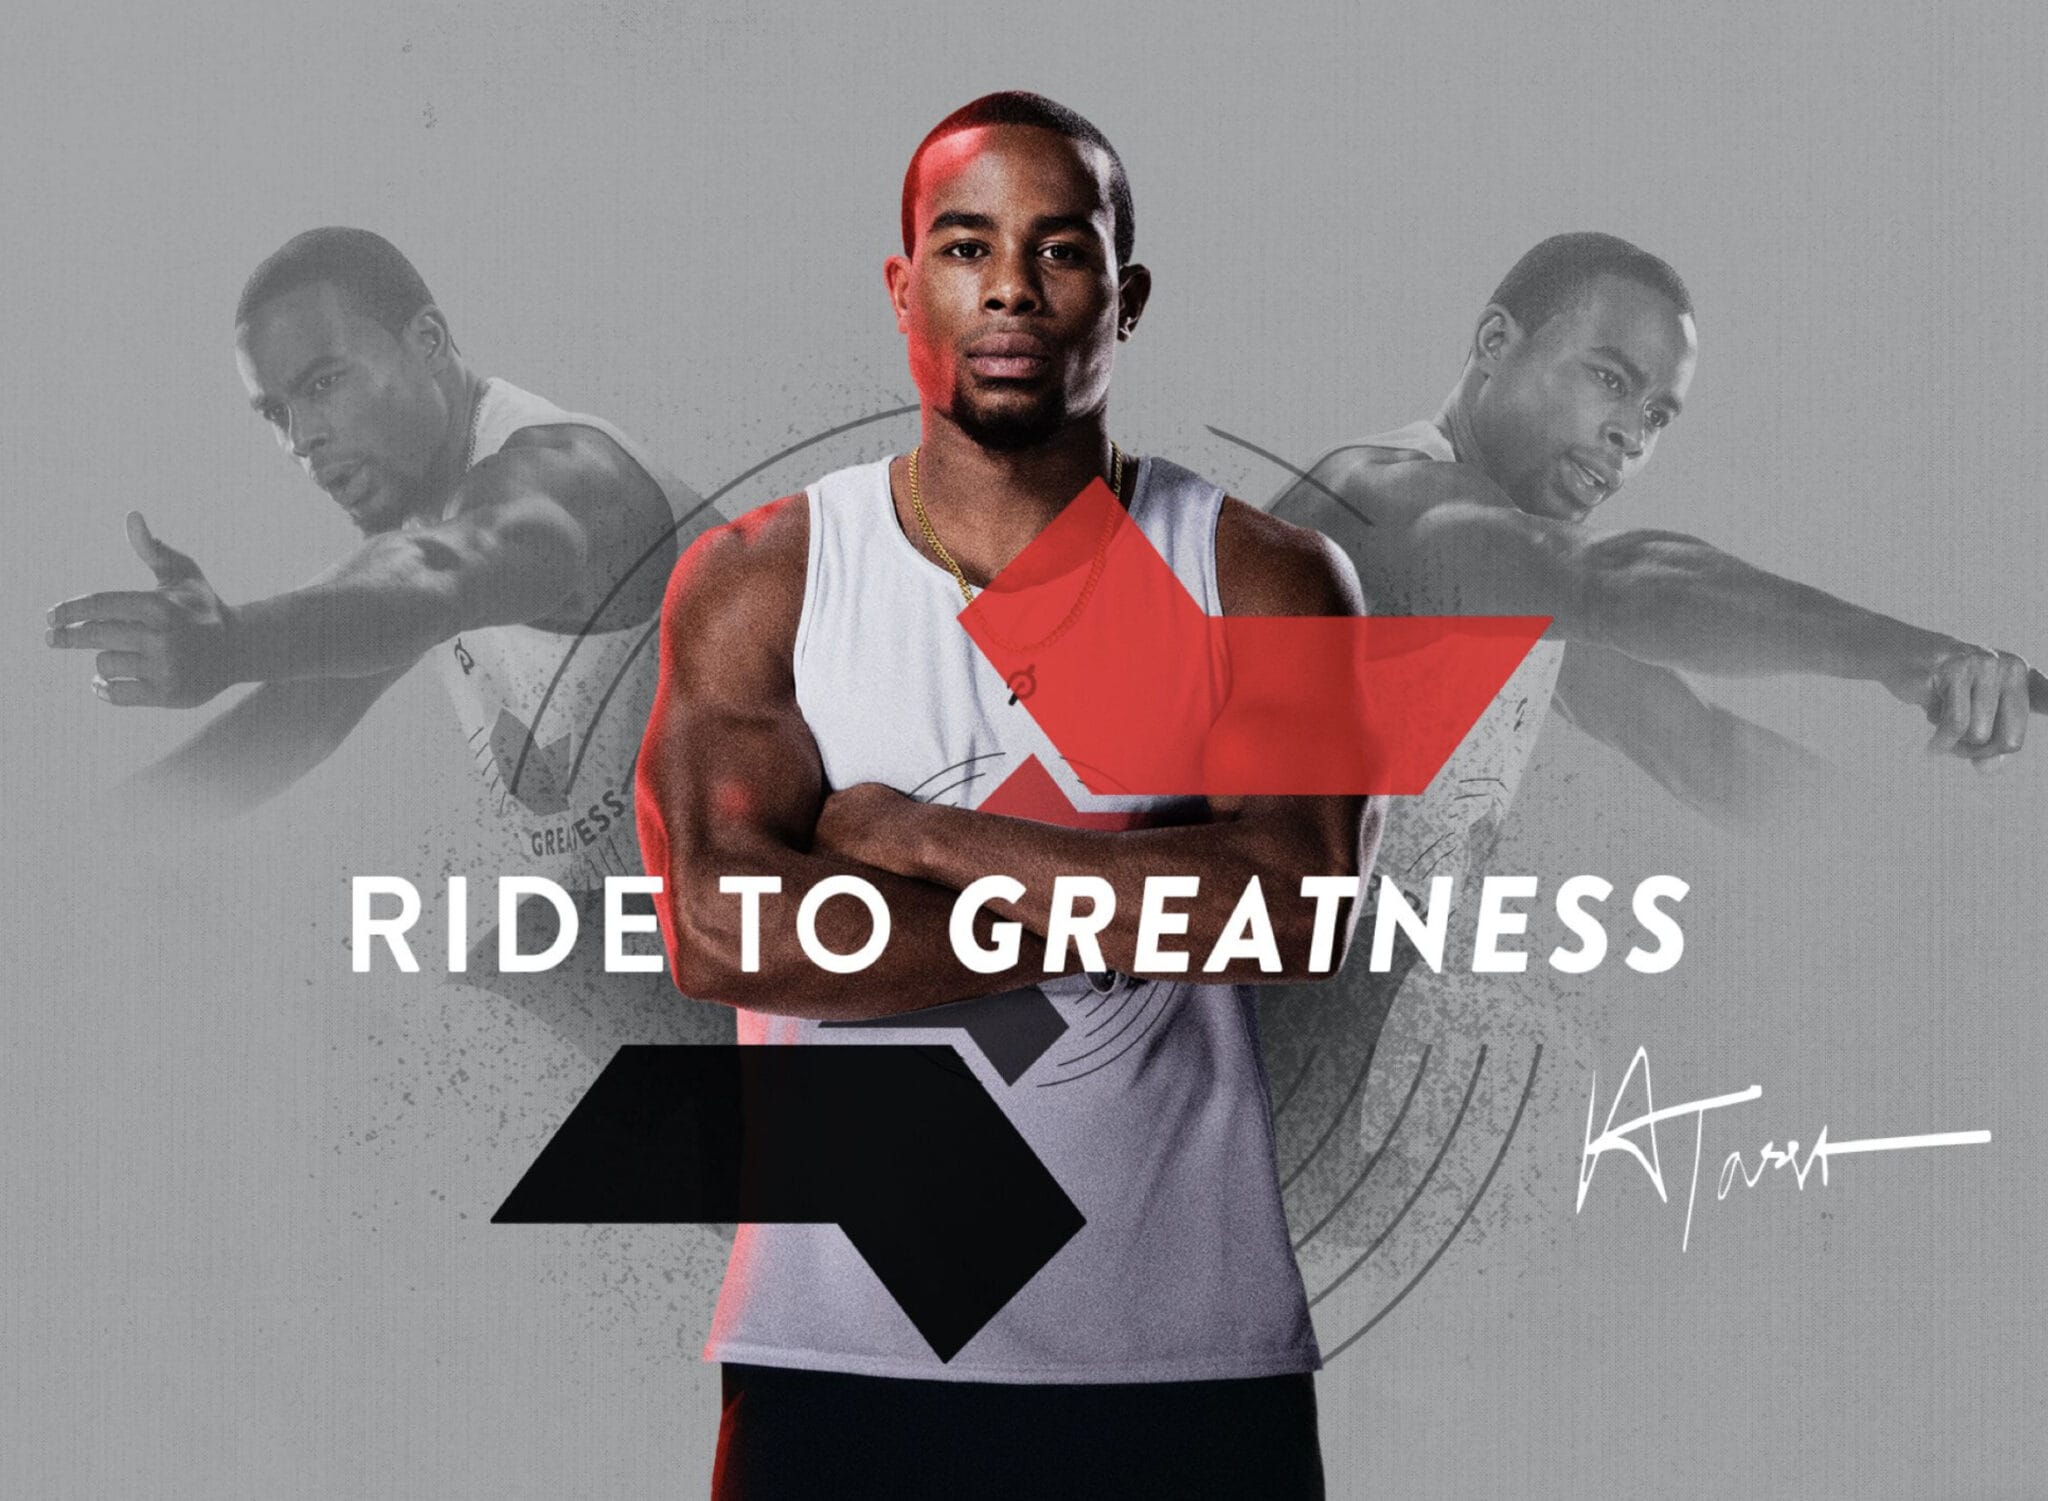 Peloton announces "Ride to Greatness" Head to Head competition with